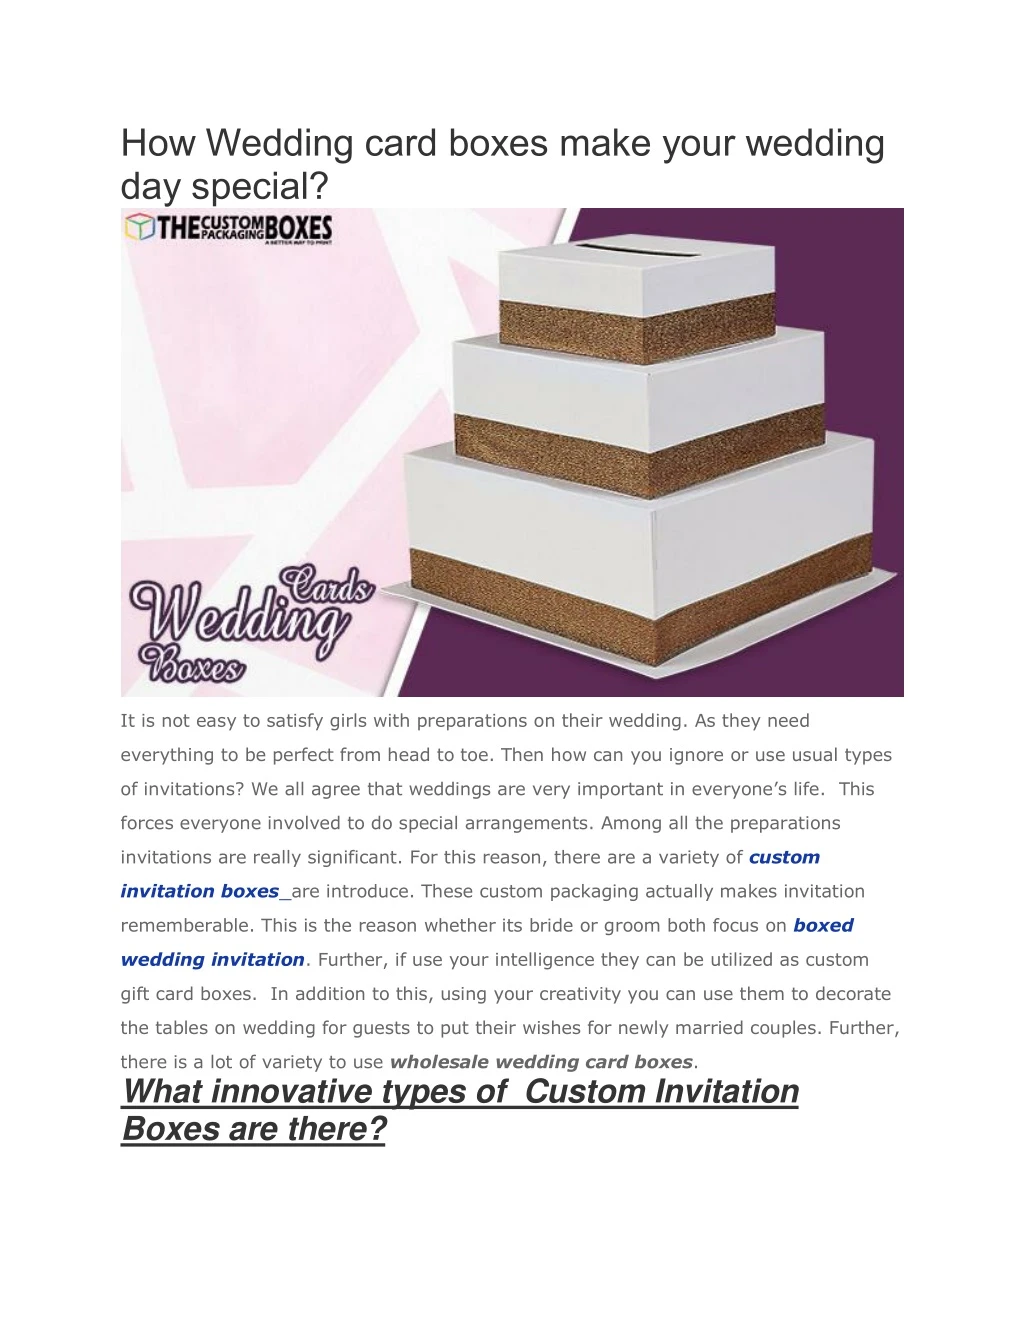 how wedding card boxes make your wedding n.